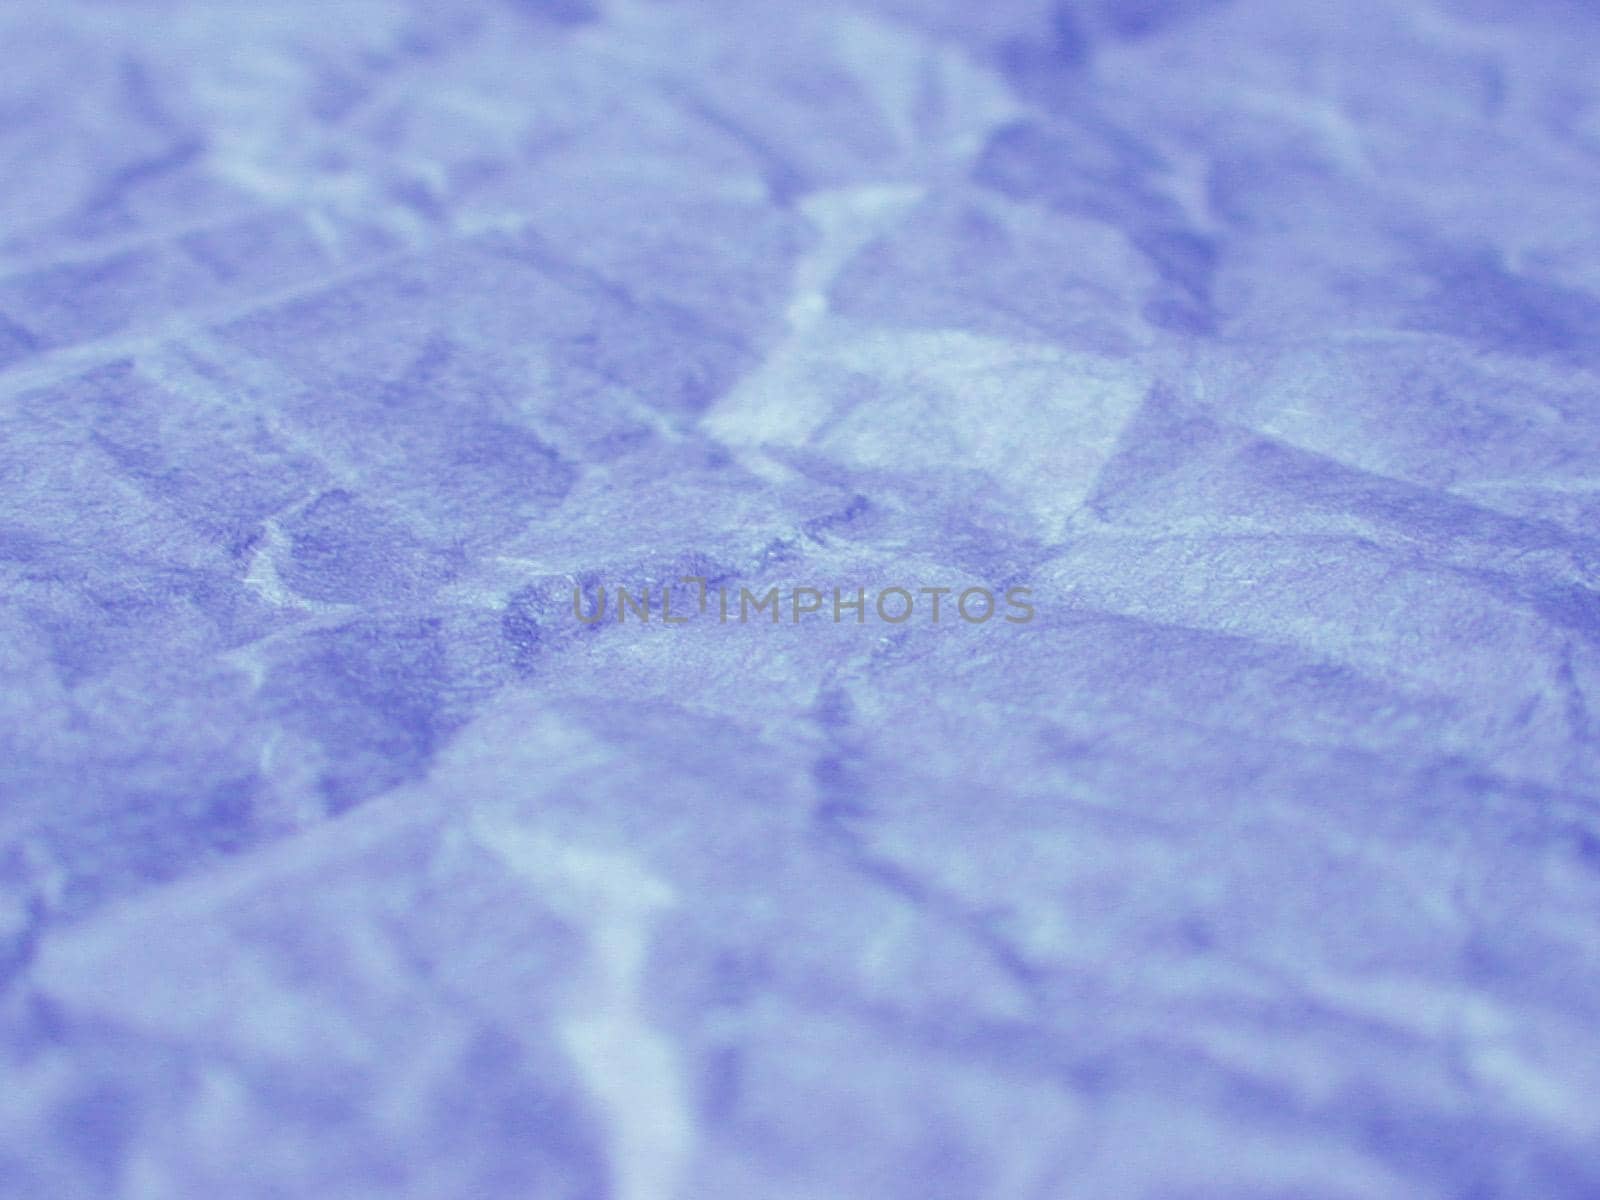 Extreme close up of wrinkled periwinkle paper by sanisra